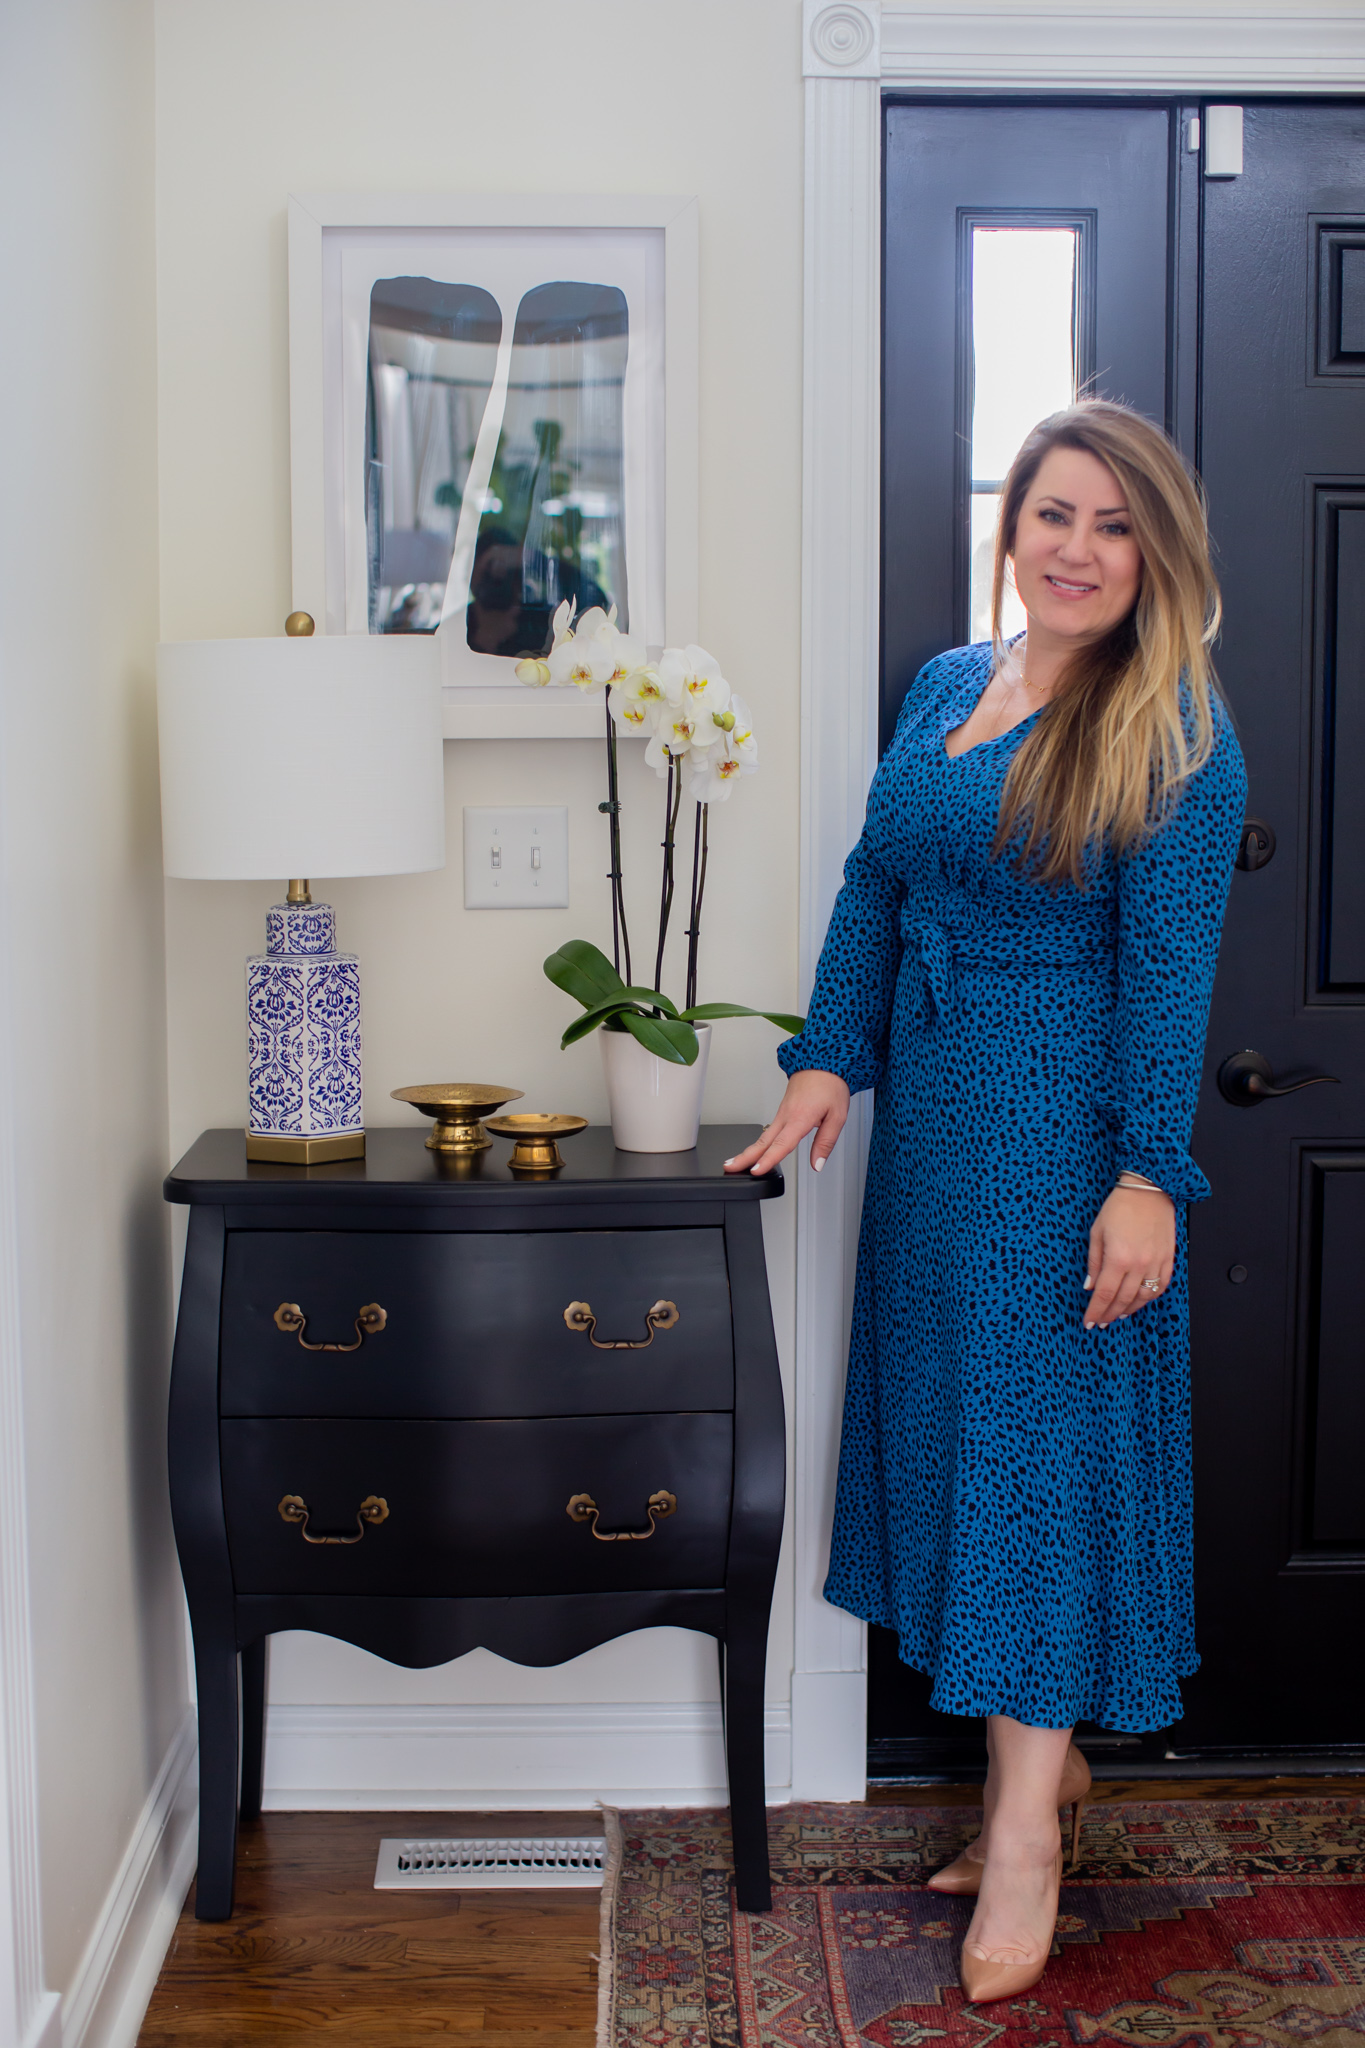 Arhaus Lighting by popular Ohio life and style blog, Coffee Beans and Bobby Pins: image of a woman wearing a blue and black leopard print dress and standing in her entry way next to a Arhaus rug, Arhaus black lines framed print 1, Arhaus bombay small chest, and Arhaus lotus bud vase.